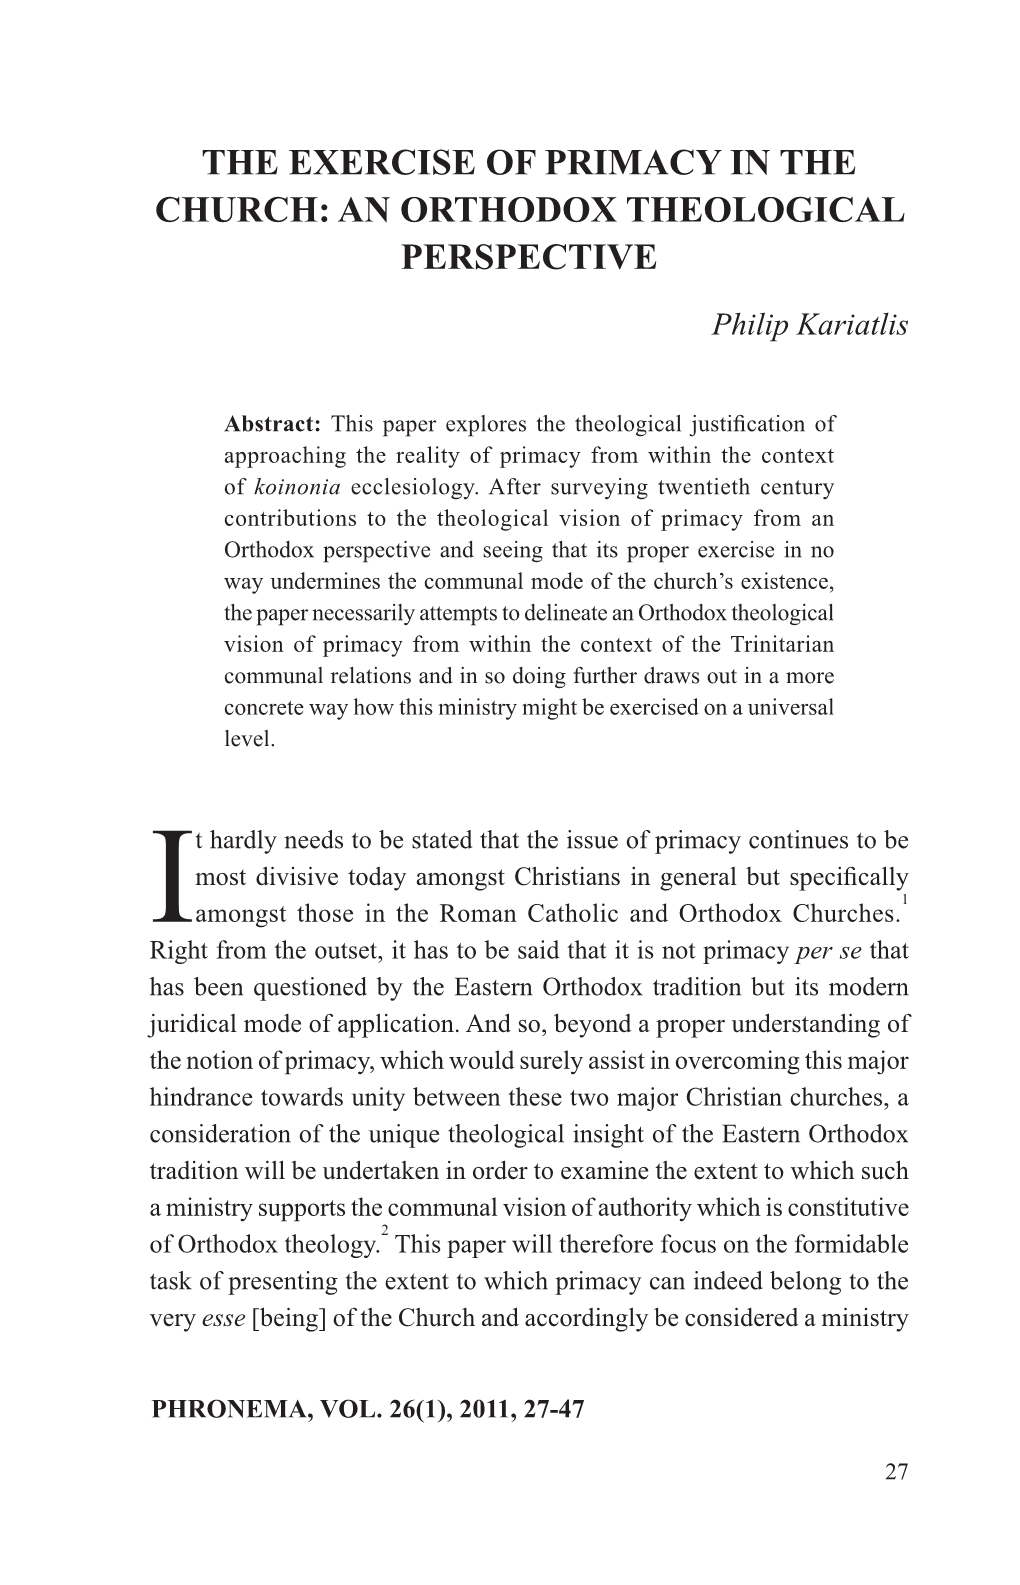 The Exercise of Primacy in the Church: an Orthodox Theological Perspective